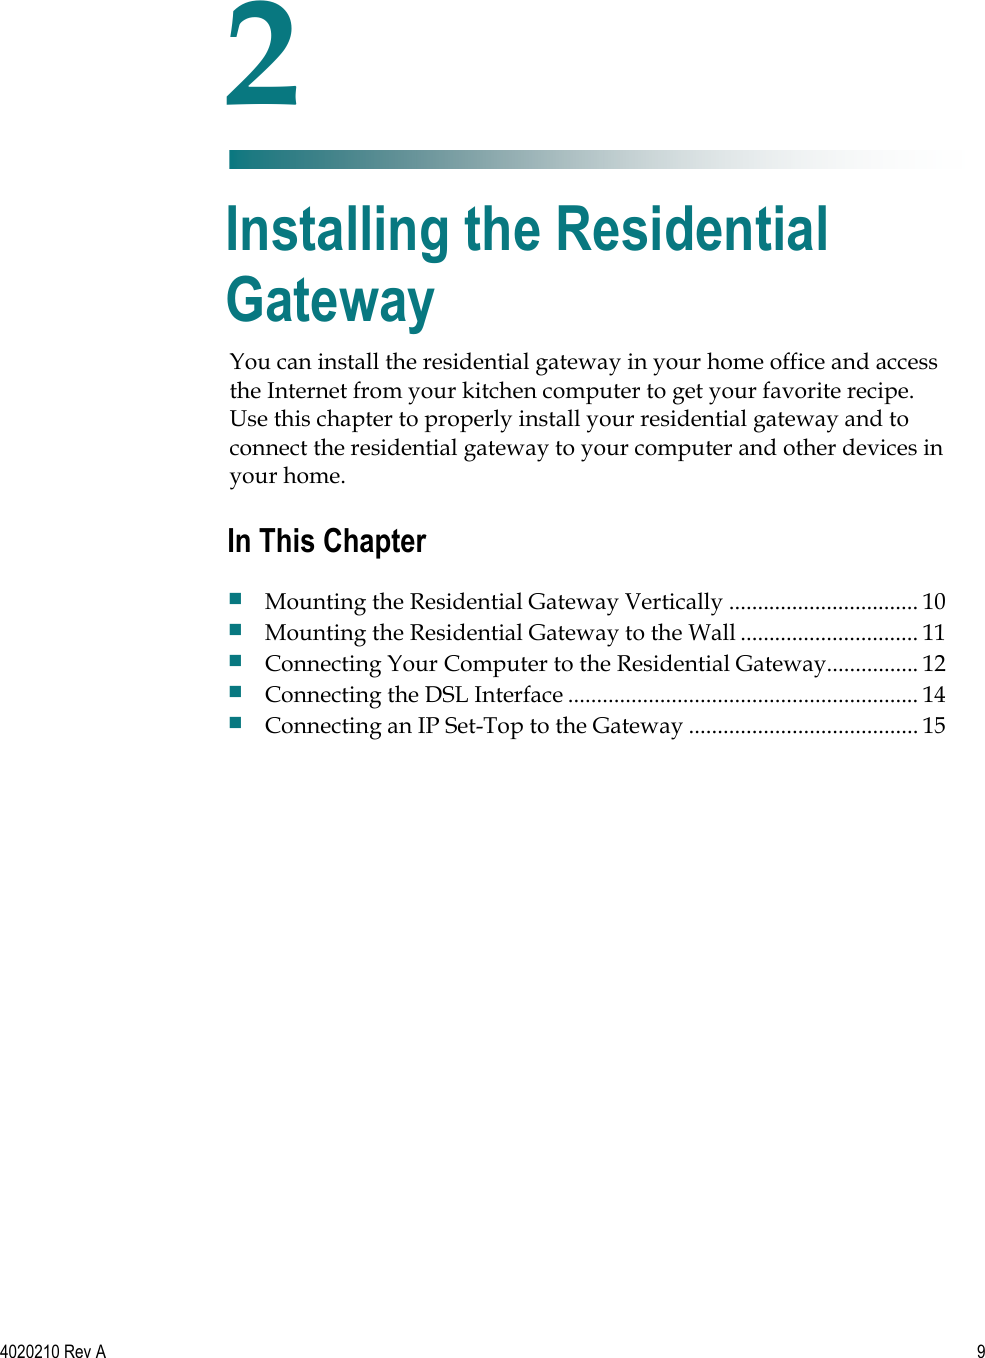   4020210 Rev A  9  You can install the residential gateway in your home office and access the Internet from your kitchen computer to get your favorite recipe. Use this chapter to properly install your residential gateway and to connect the residential gateway to your computer and other devices in your home.    2 Chapter 2 Installing the Residential Gateway In This Chapter  Mounting the Residential Gateway Vertically ................................. 10  Mounting the Residential Gateway to the Wall ............................... 11  Connecting Your Computer to the Residential Gateway................ 12  Connecting the DSL Interface ............................................................. 14  Connecting an IP Set-Top to the Gateway ........................................ 15 